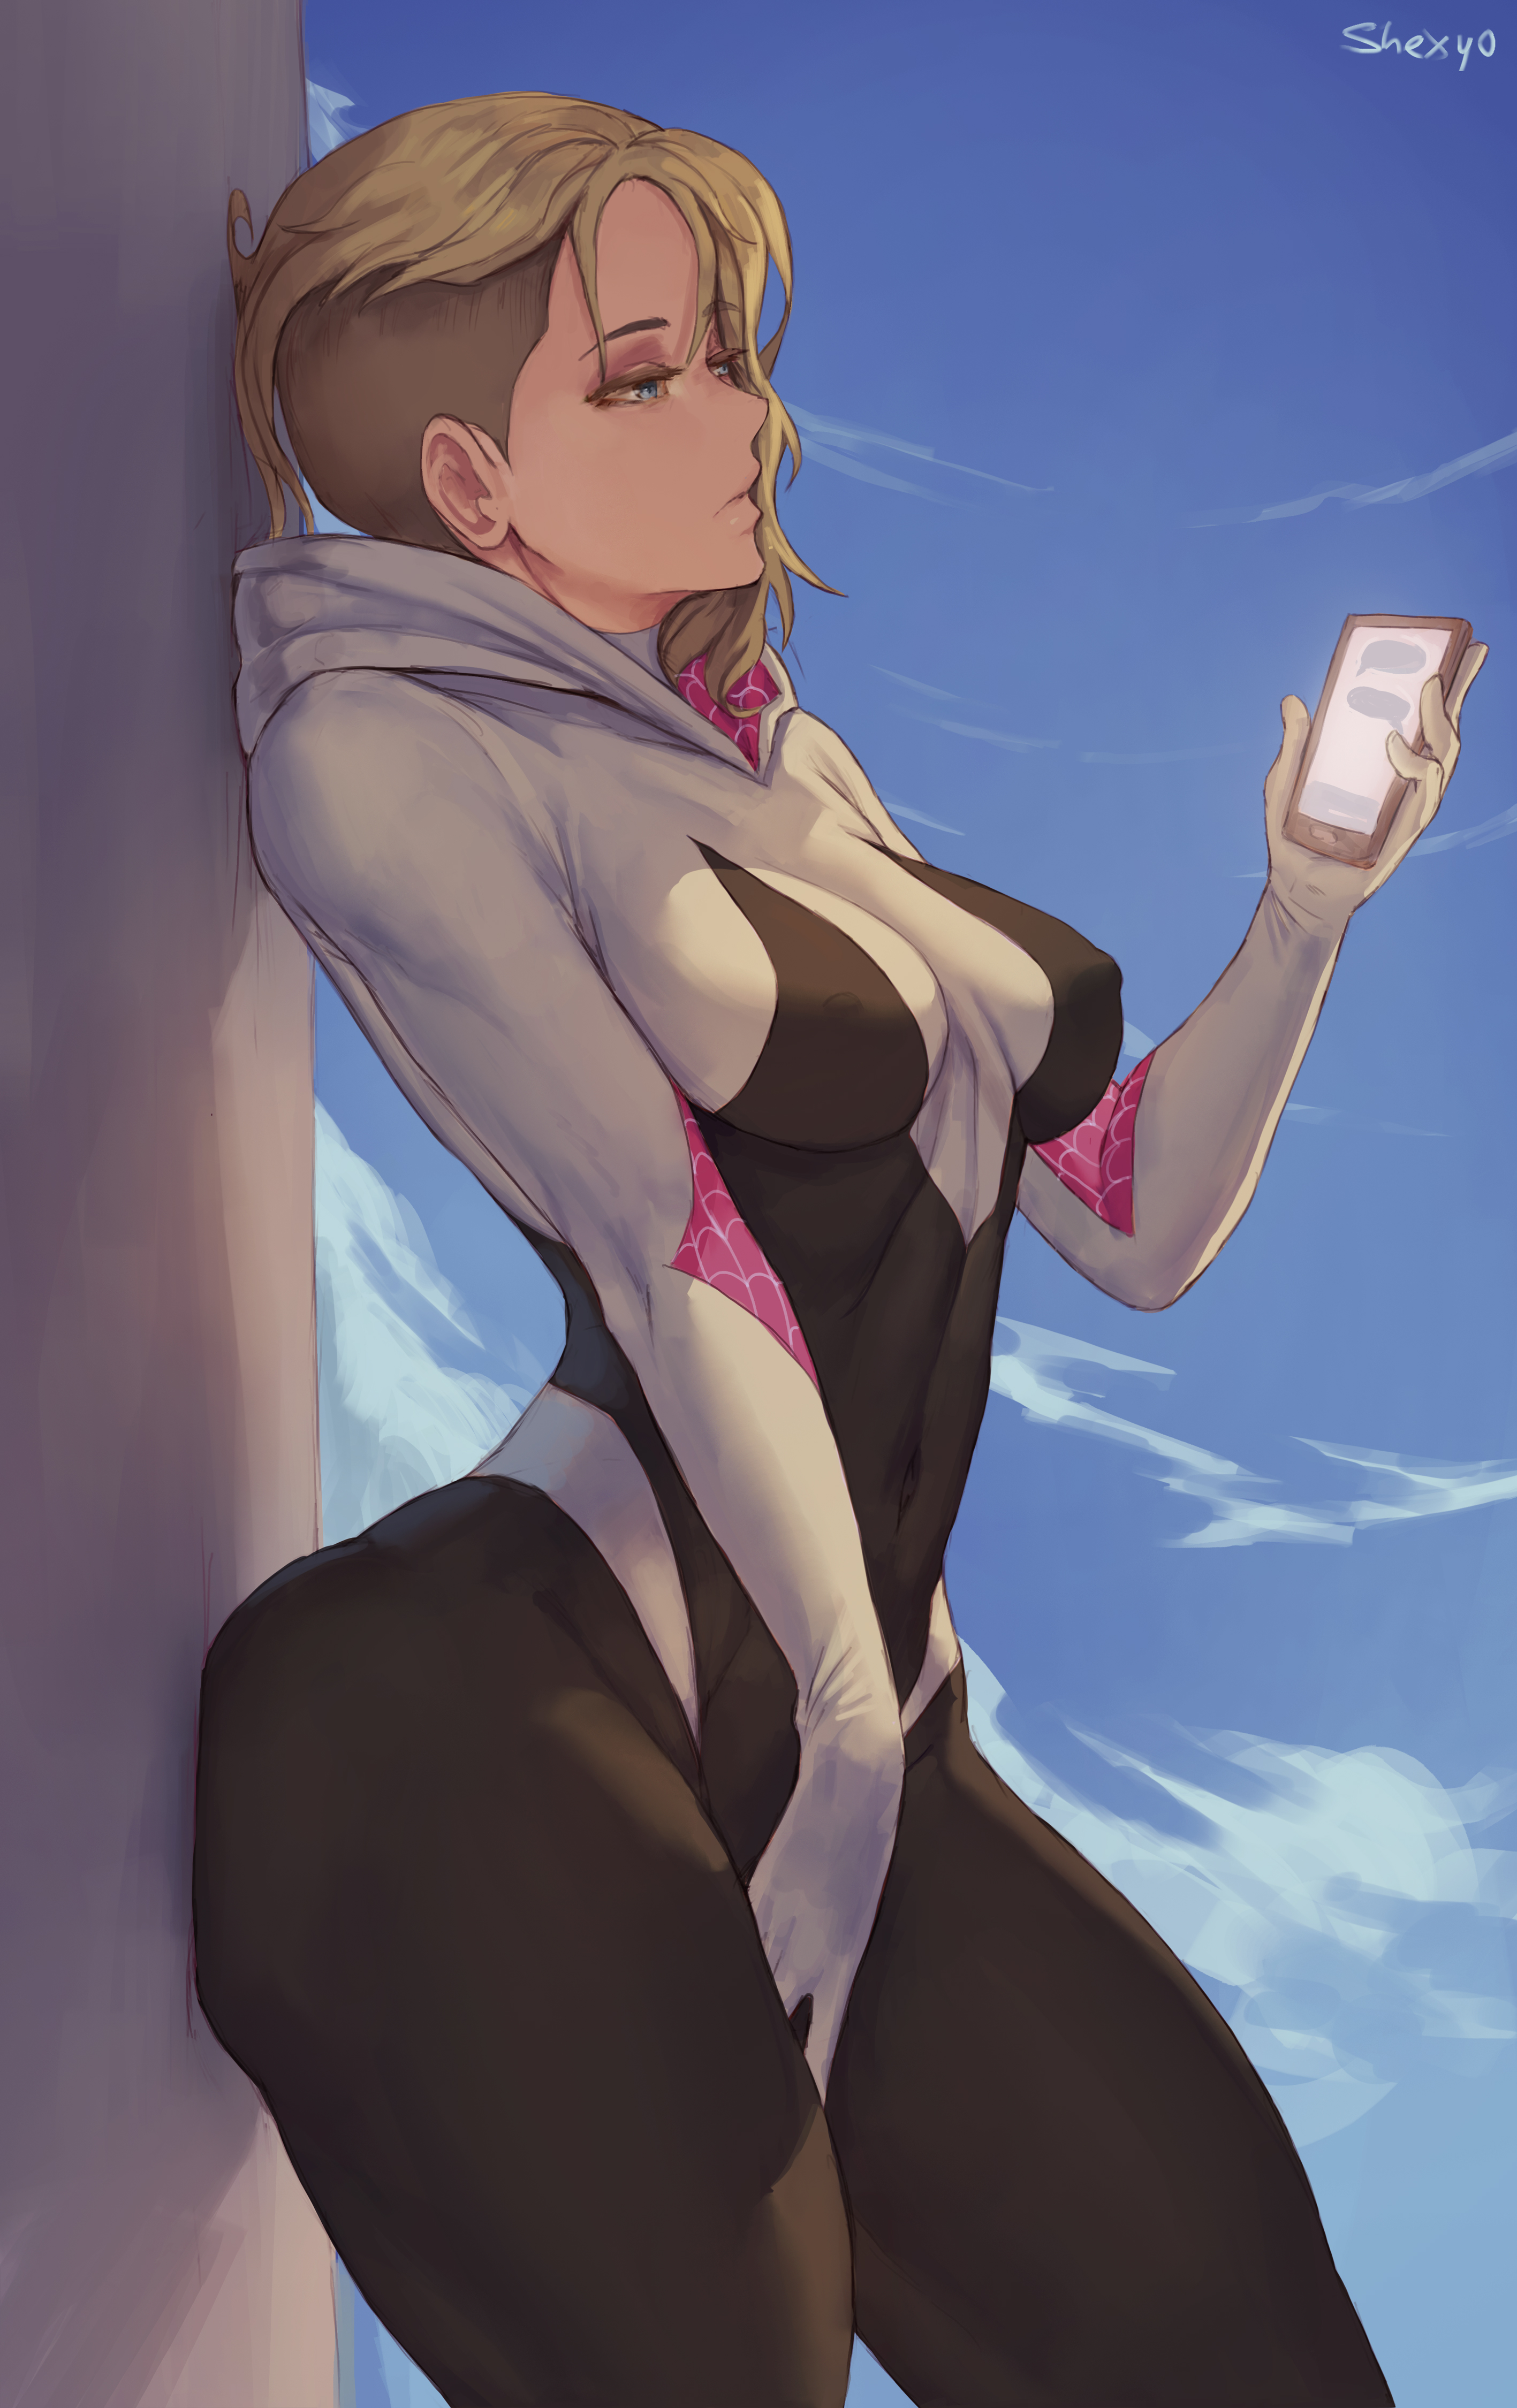 Anime 2834x4500 Gwen Stacy Spider Gwen blonde side shave blue eyes superheroines bodysuit costumes thick thigh curvy vertical artwork drawing digital art 2D illustration fan art Shexyo profile tight clothing no bra cellphone sky Spider-Man